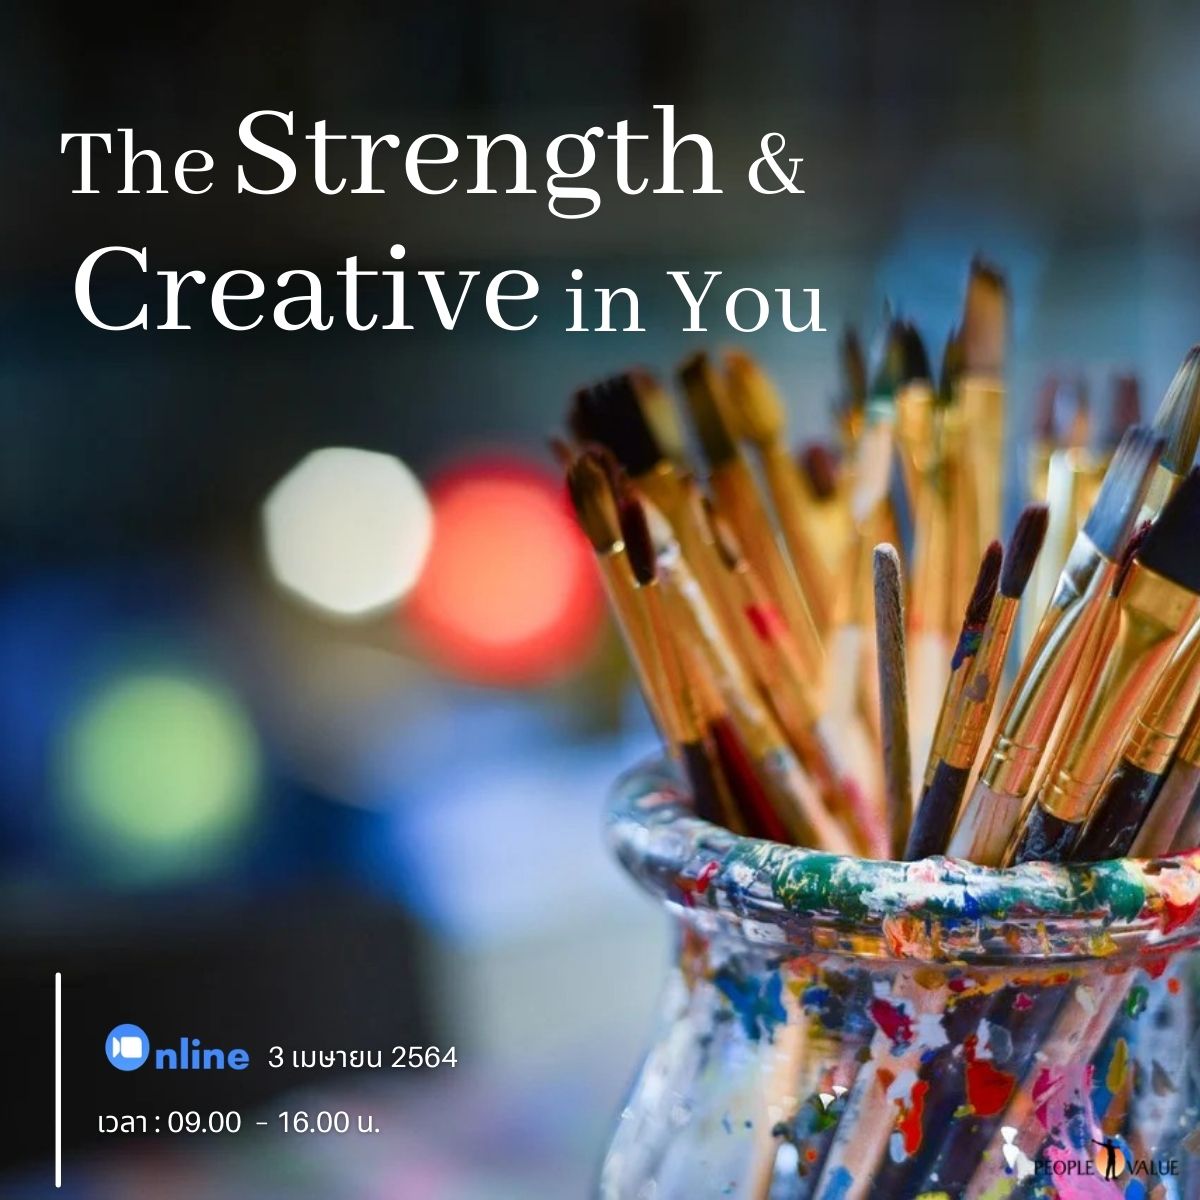 The Strength & Creative in You